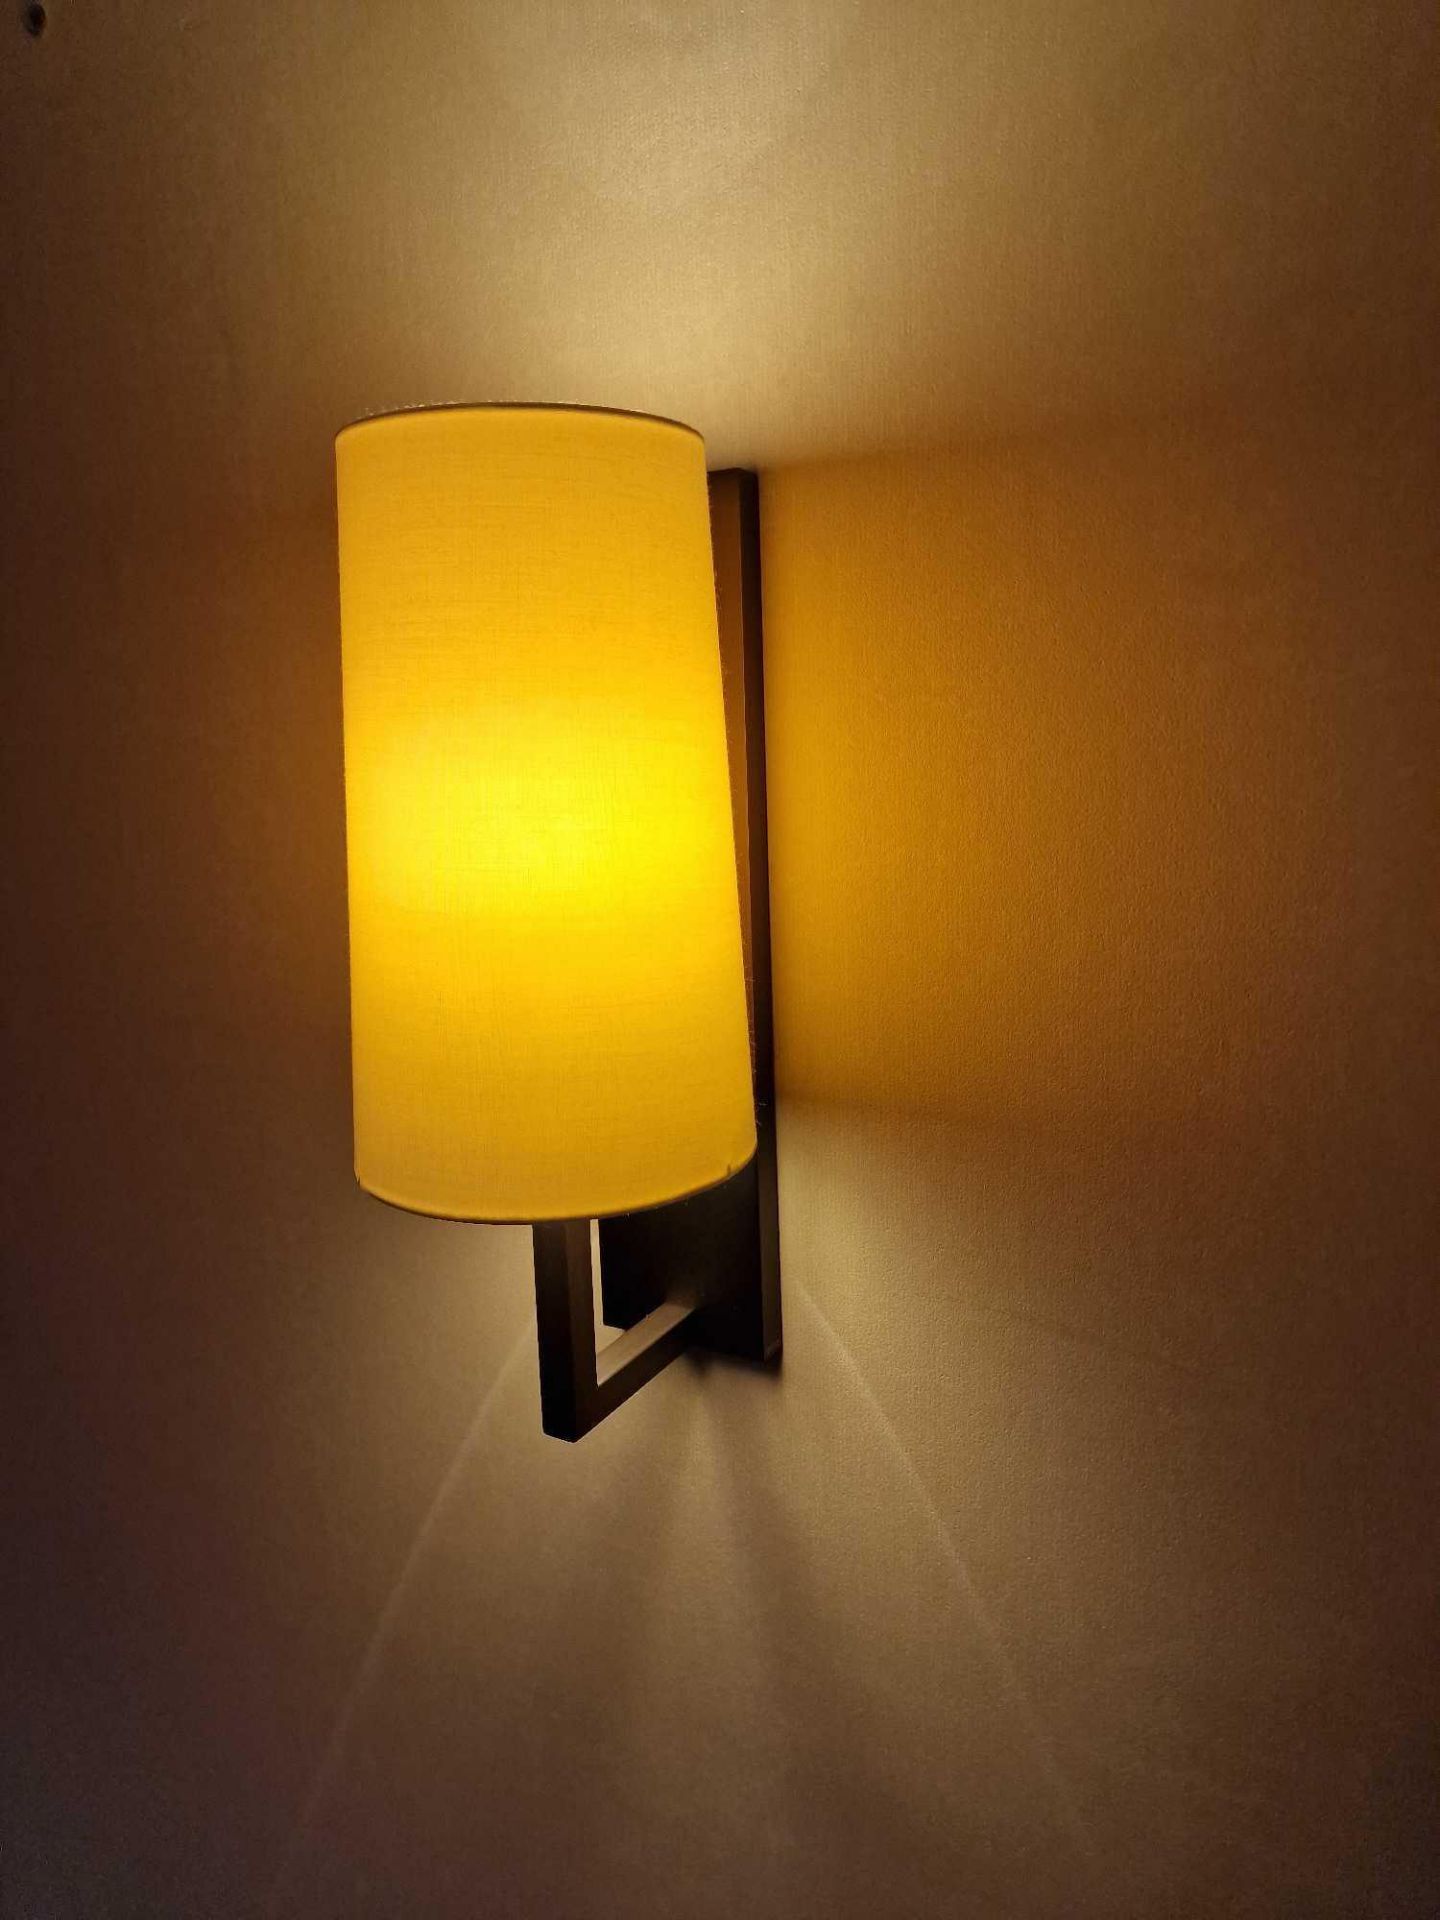 2 x Astro Lighting Riva 350 bronzed wall light Astro Riva 350 Indoor wall light offers a - Image 2 of 2